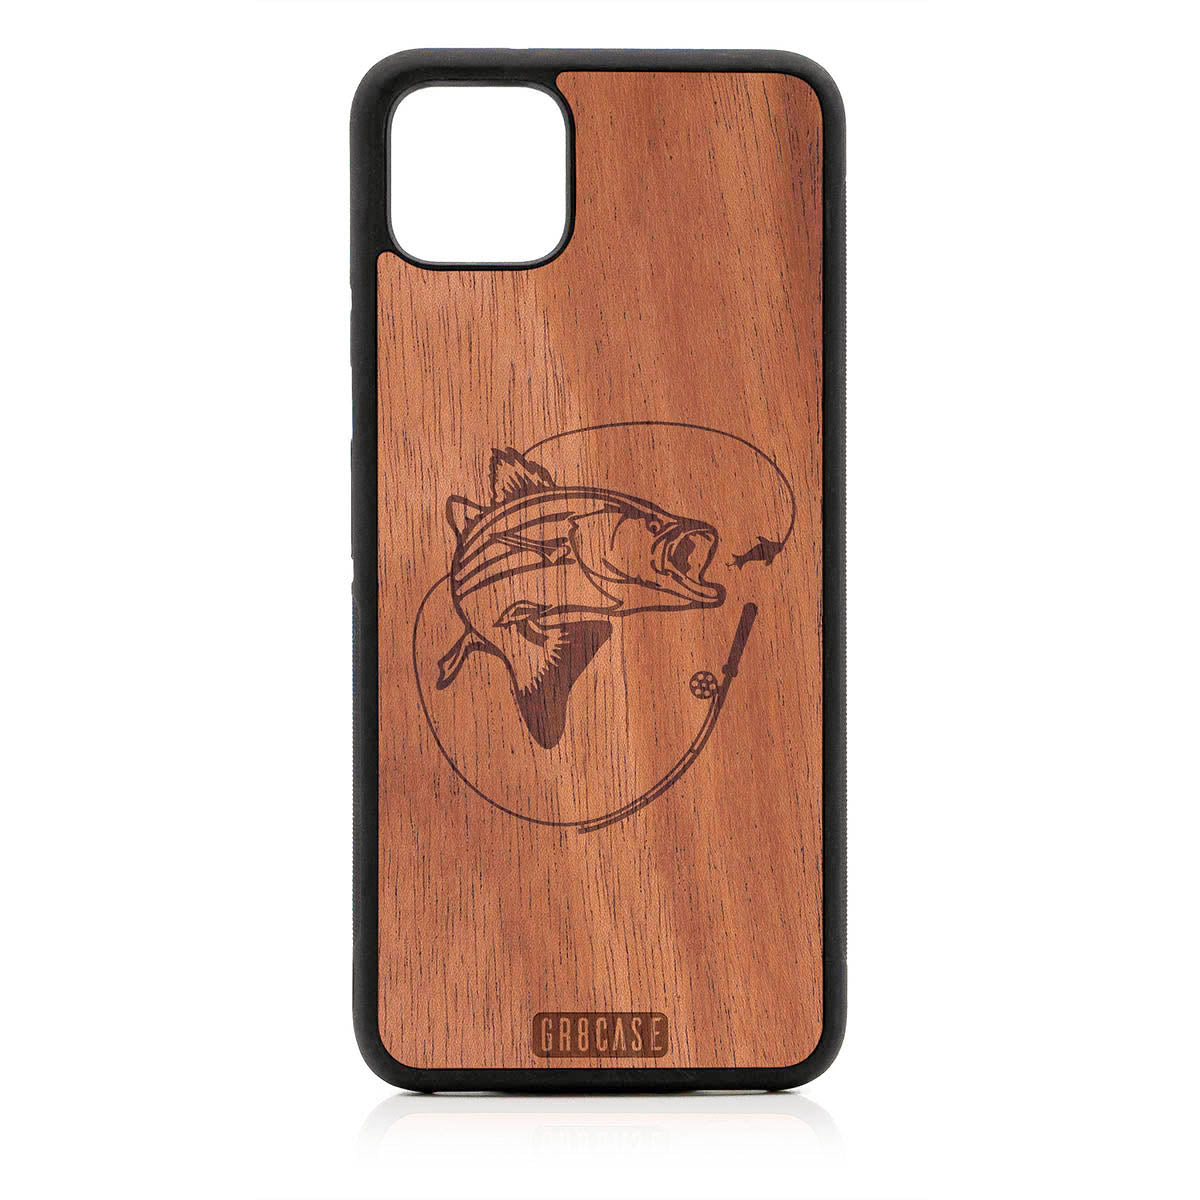 Fish and Reel Design Wood Case For Google Pixel 4XL by GR8CASE